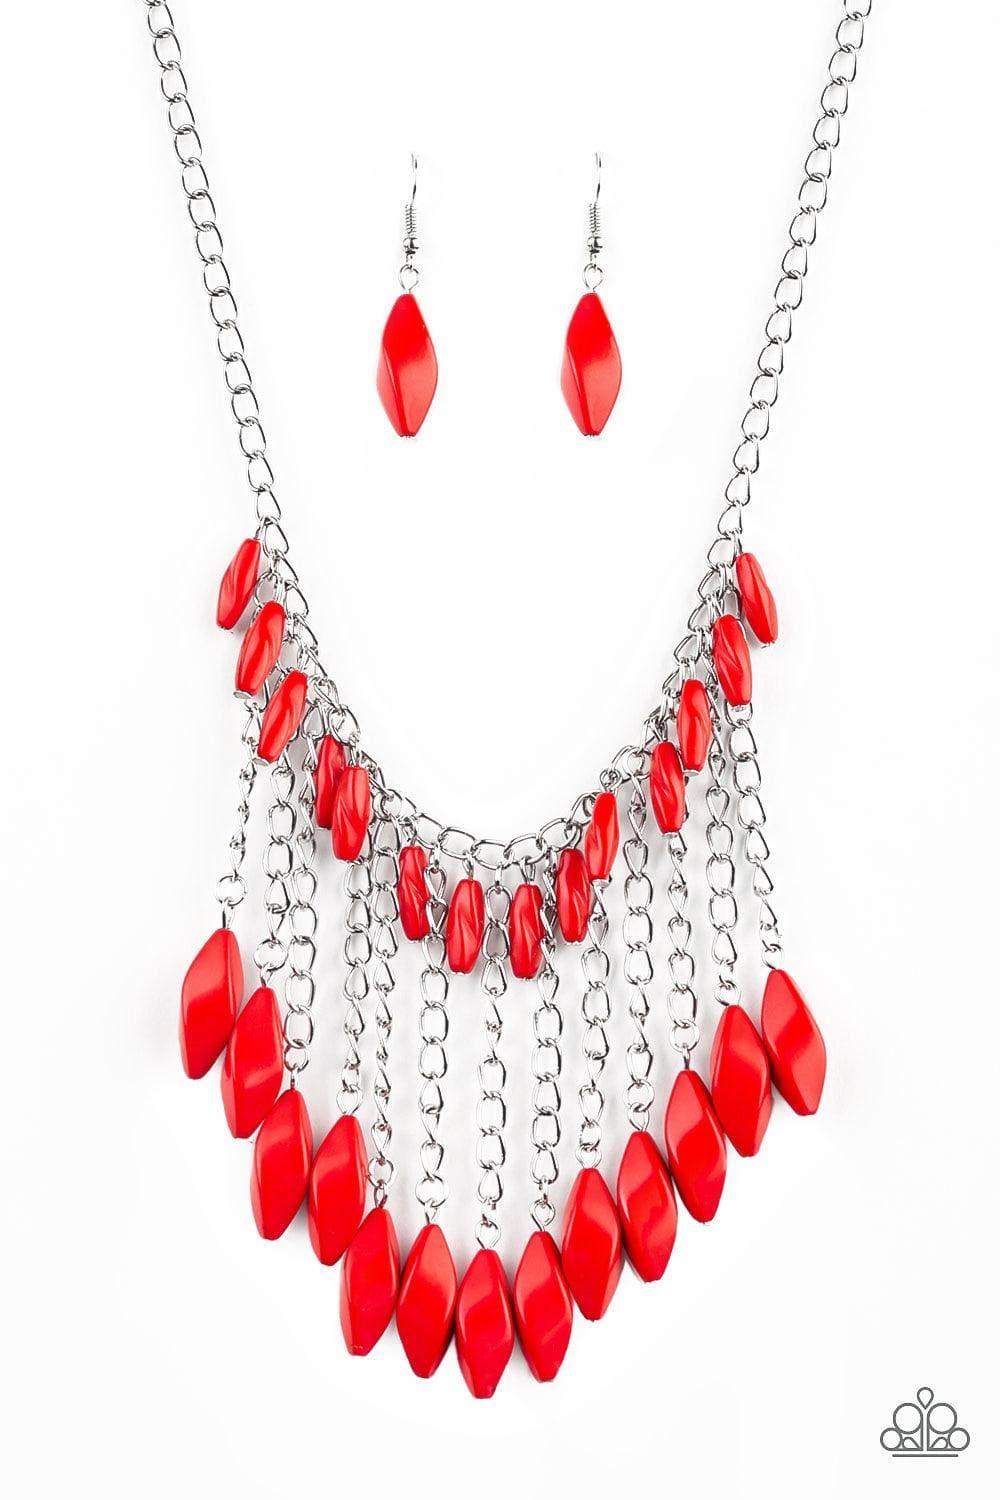 Paparazzi Accessories - Venturous Vibes - Red Necklace - Bling by JessieK